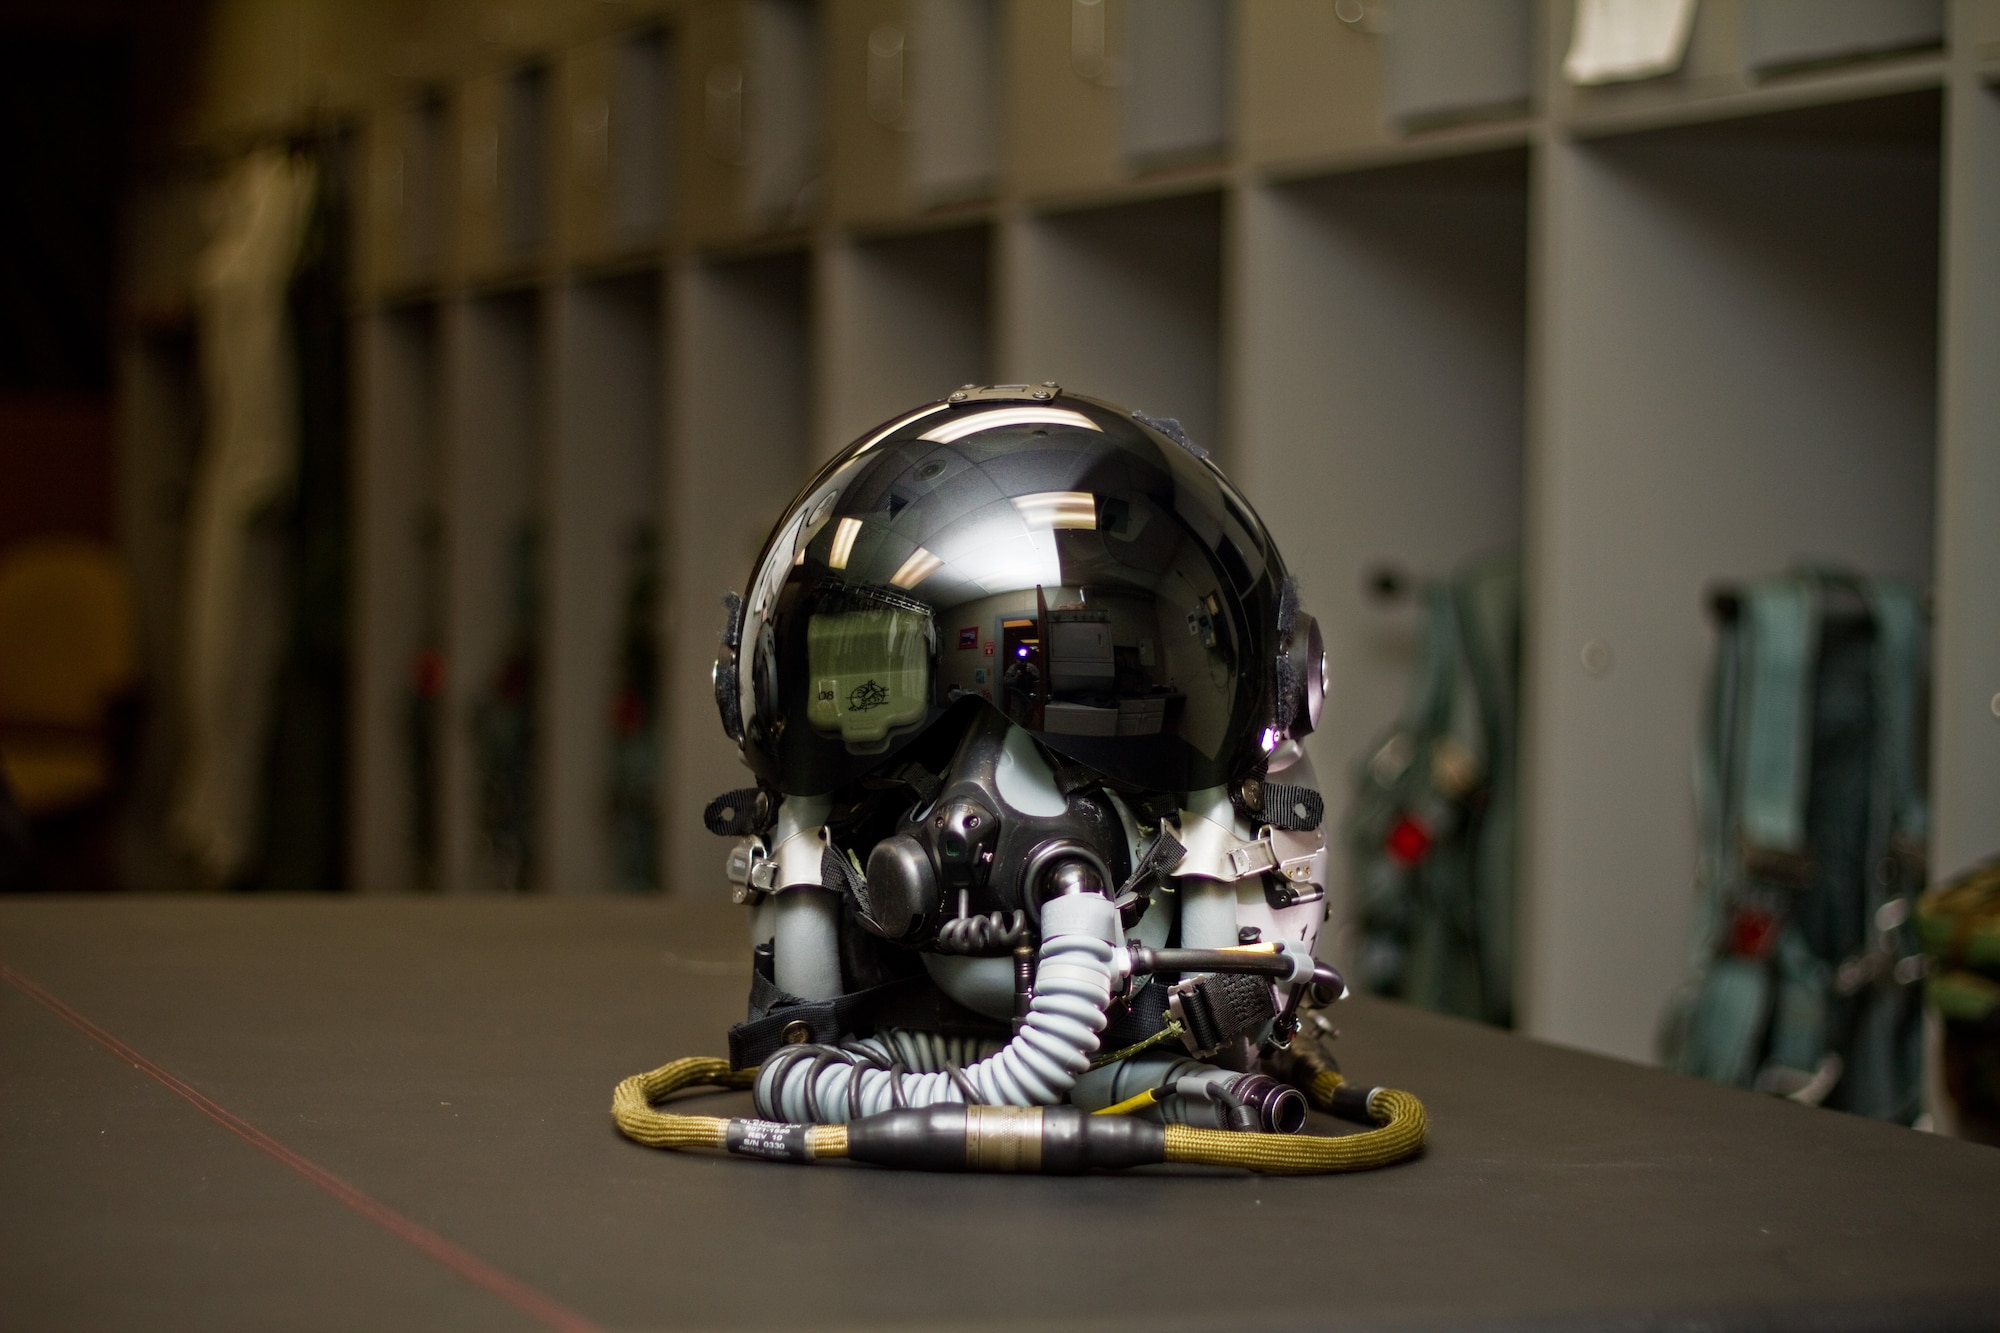 A picture of a U.S. Air Force F-16 Fighting Falcon pilot's helmet with the Helmet Mounted Integrated Targeting (HMIT) system.